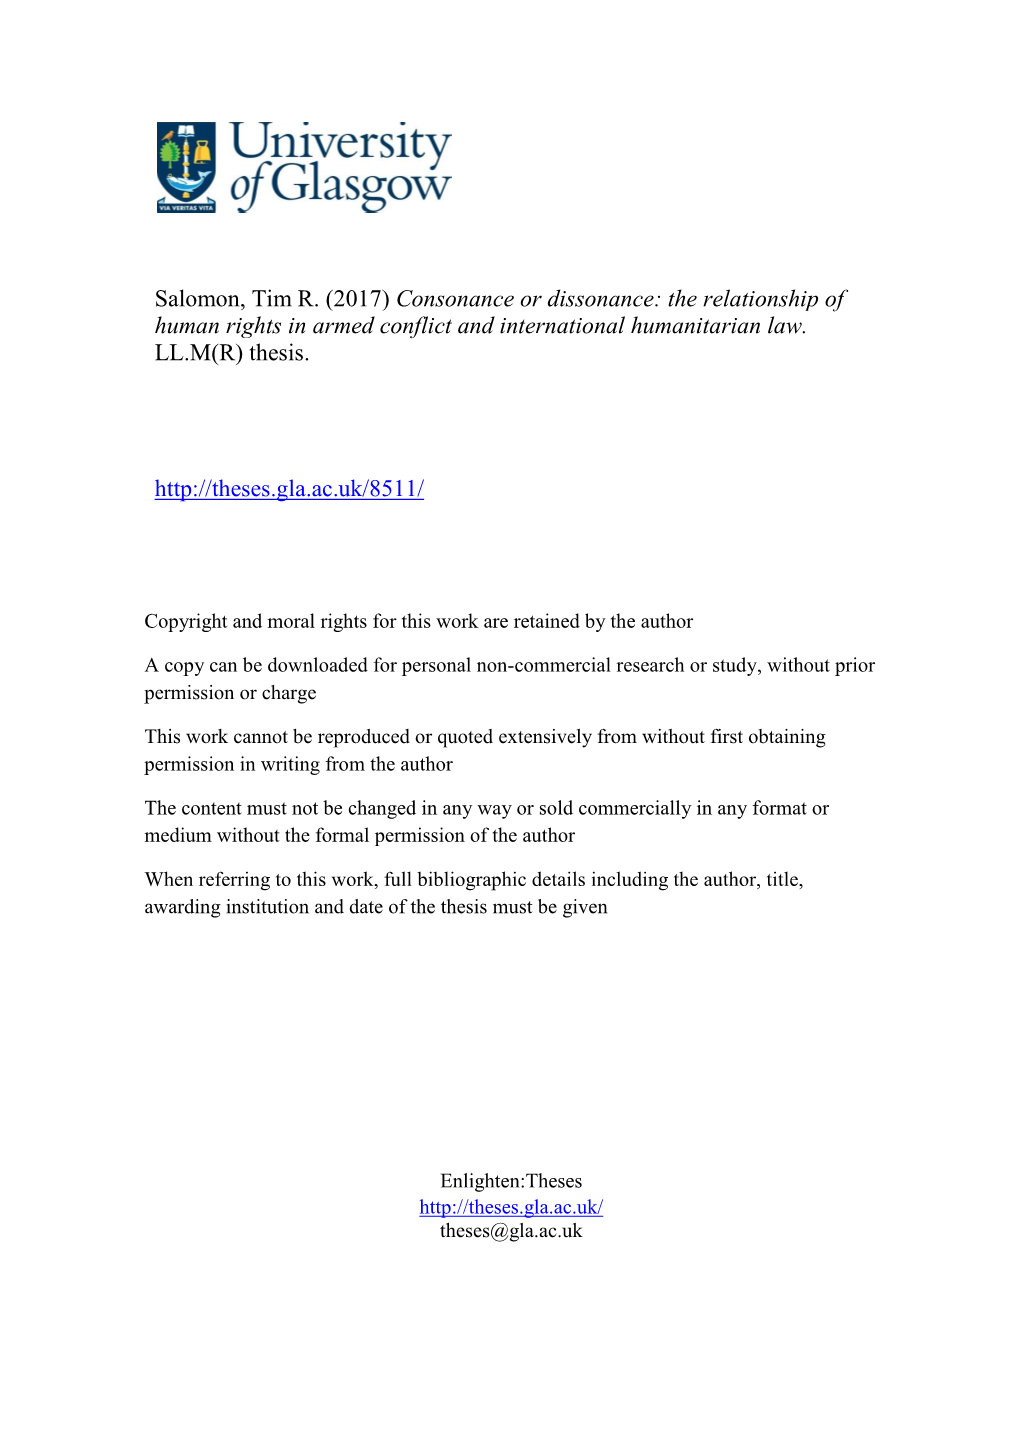 The Relationship of Human Rights in Armed Conflict and International Humanitarian Law